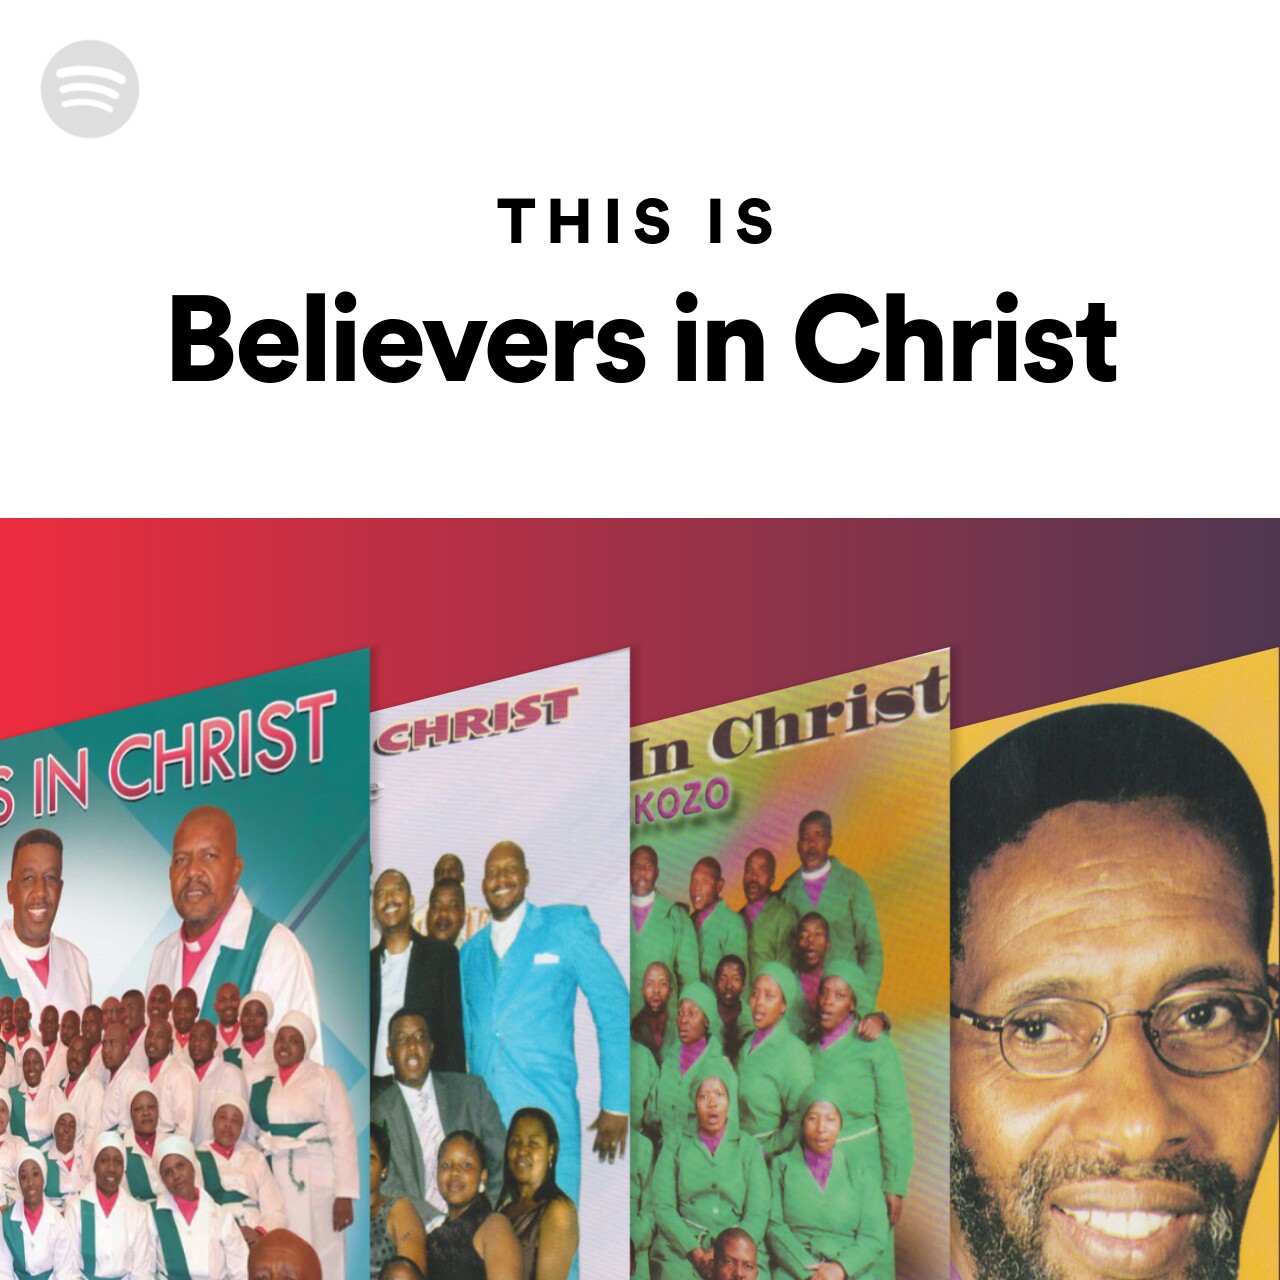 This Is Believers in Christ